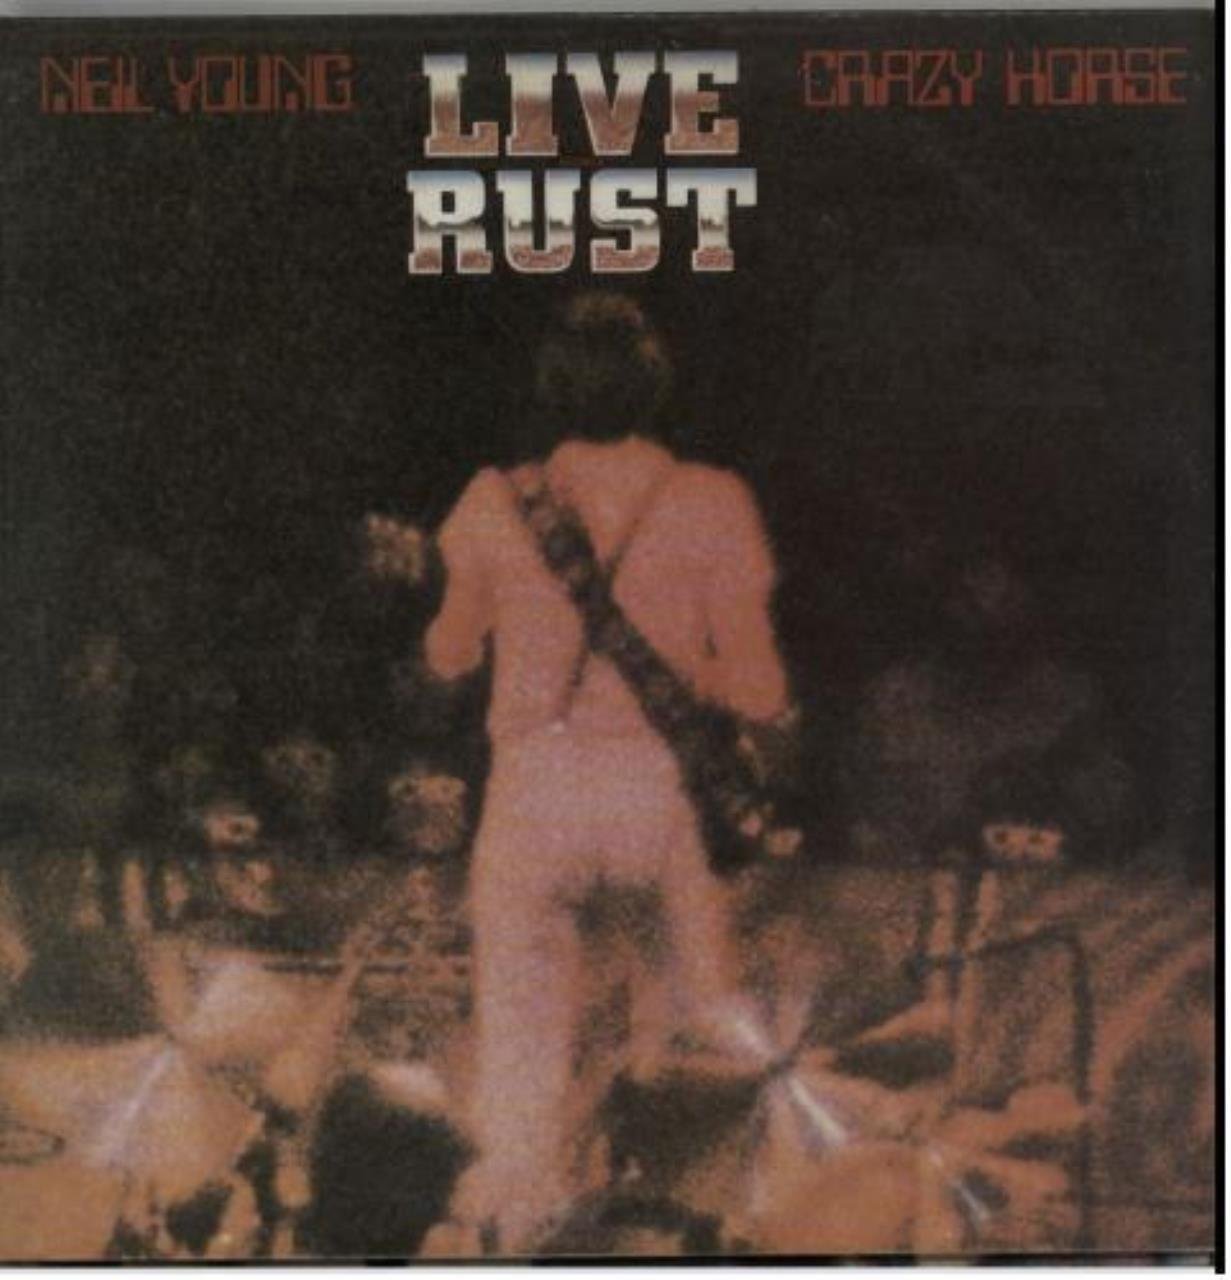 Neil Young - Live Rust - 2LP